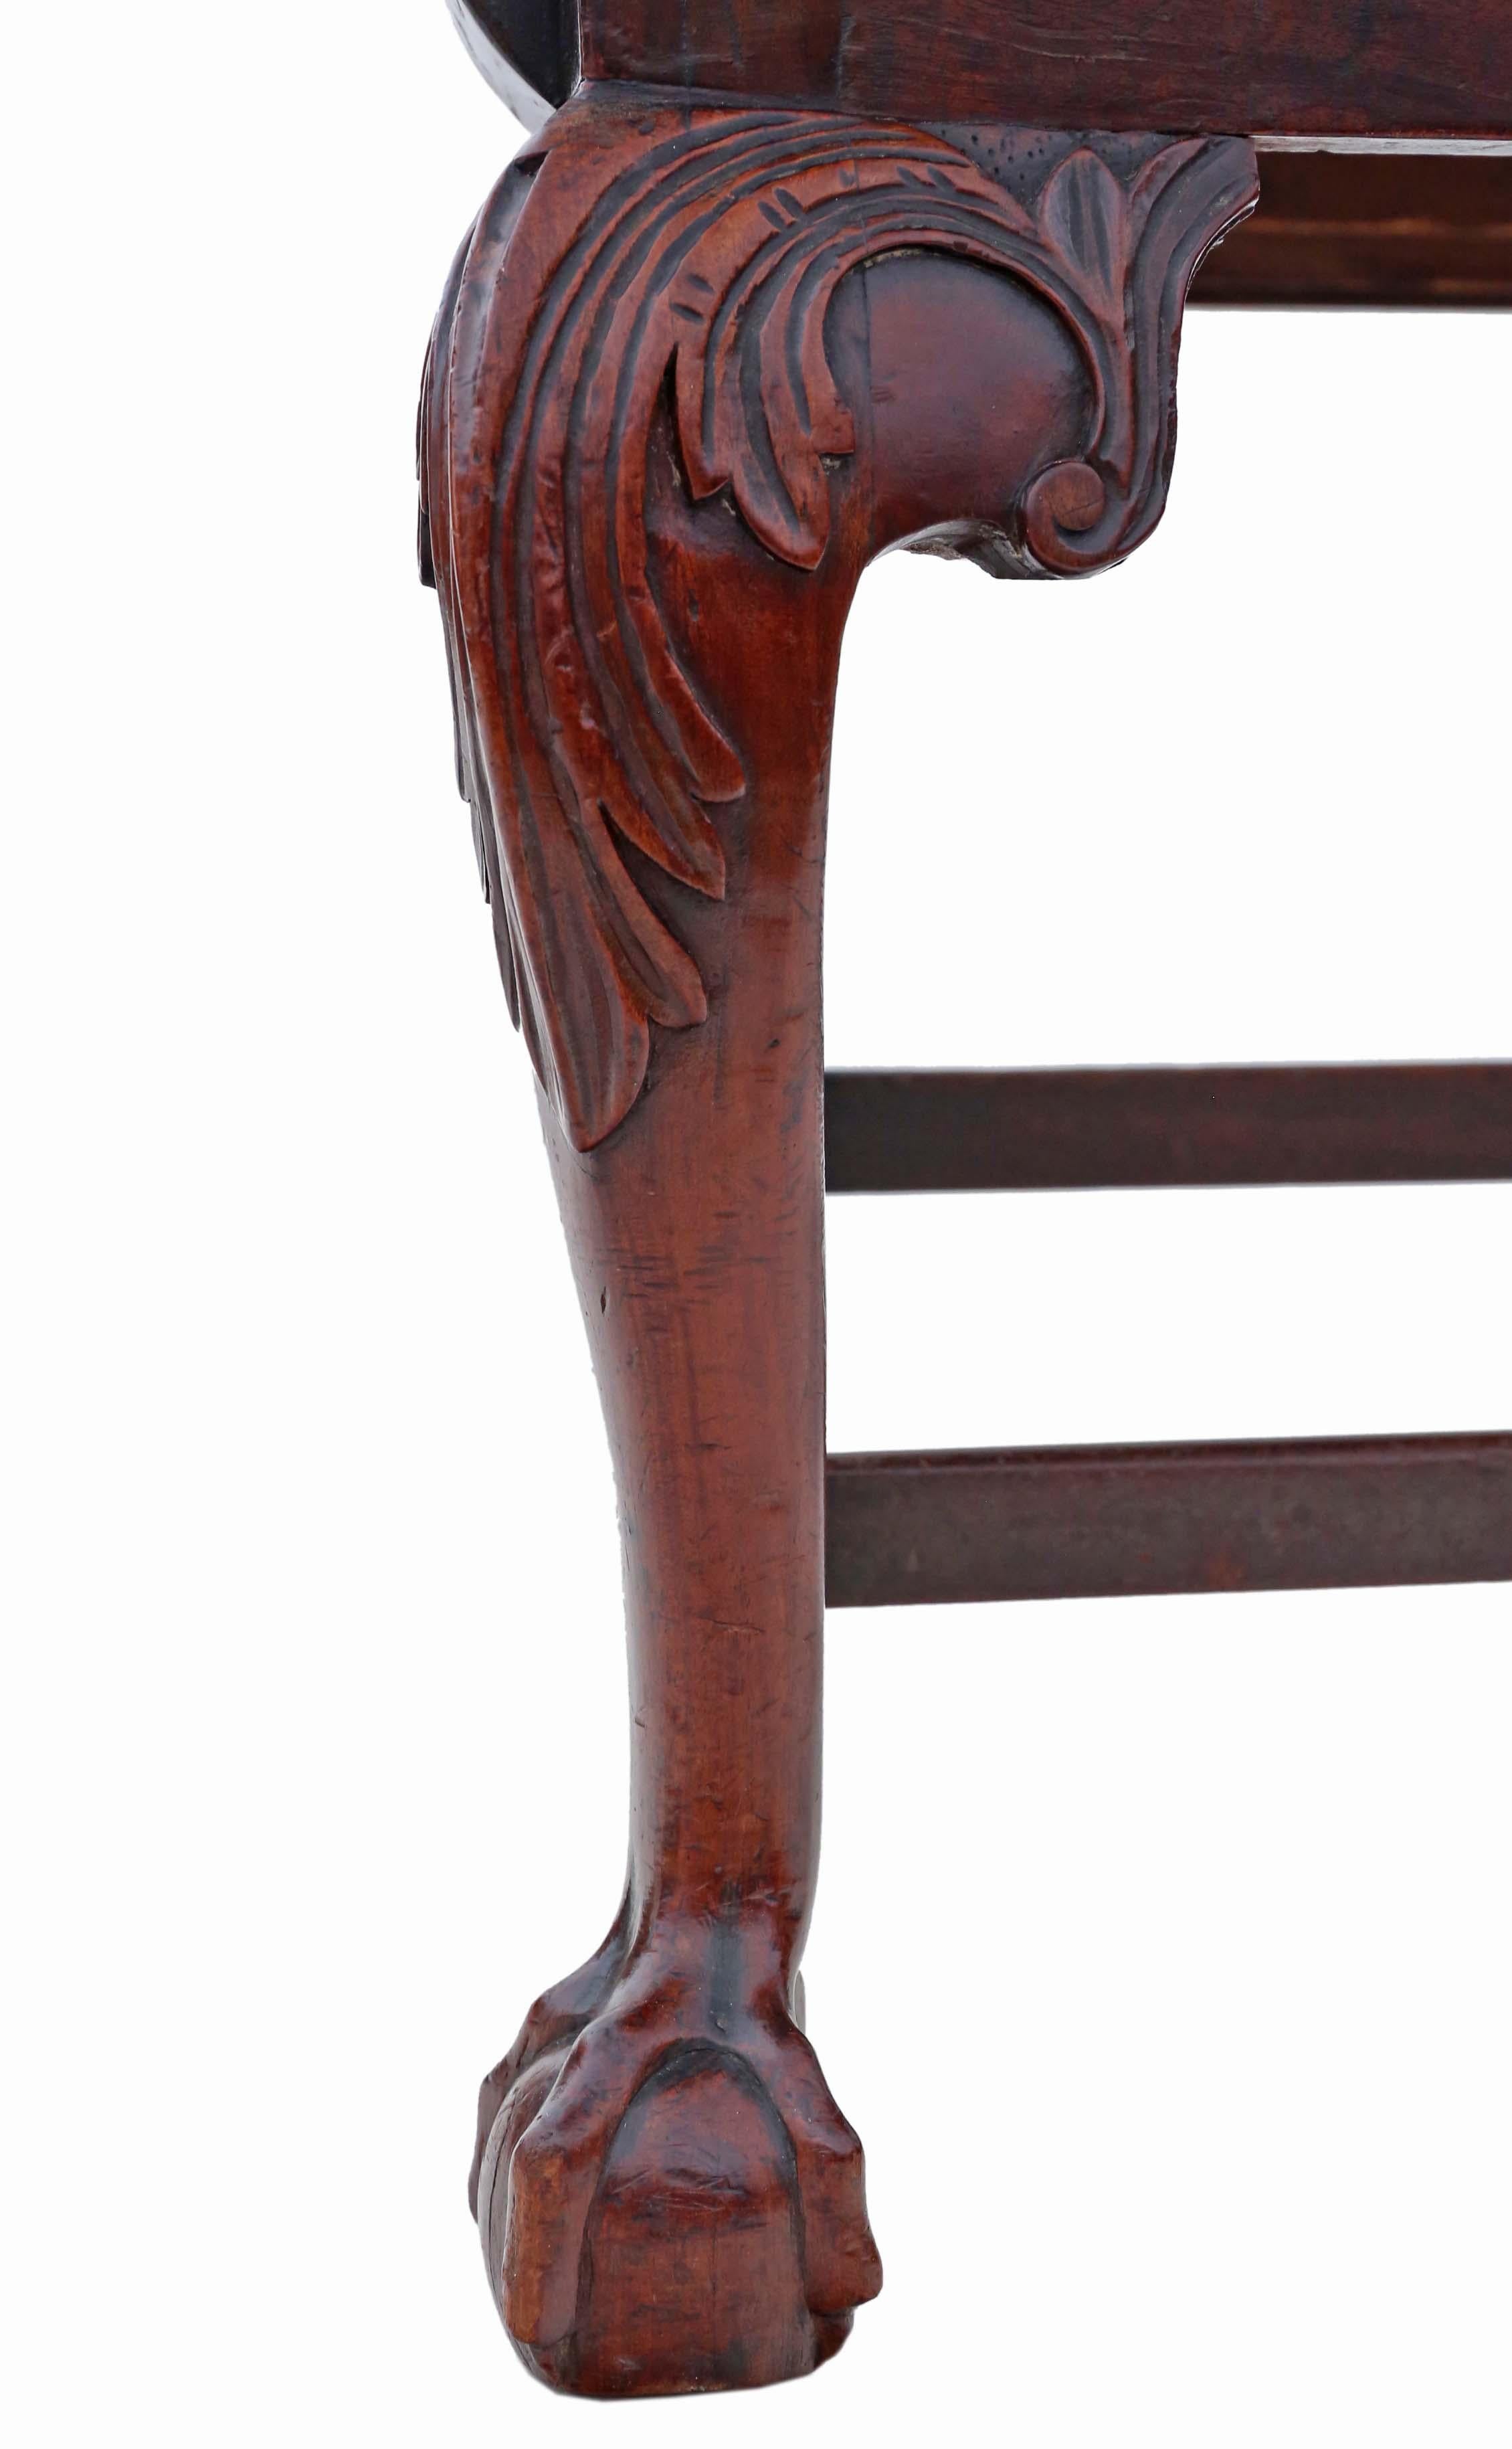 Antique Fine Quality Georgian Mahogany Elbow, Carver or Desk Chair 18th Century For Sale 2